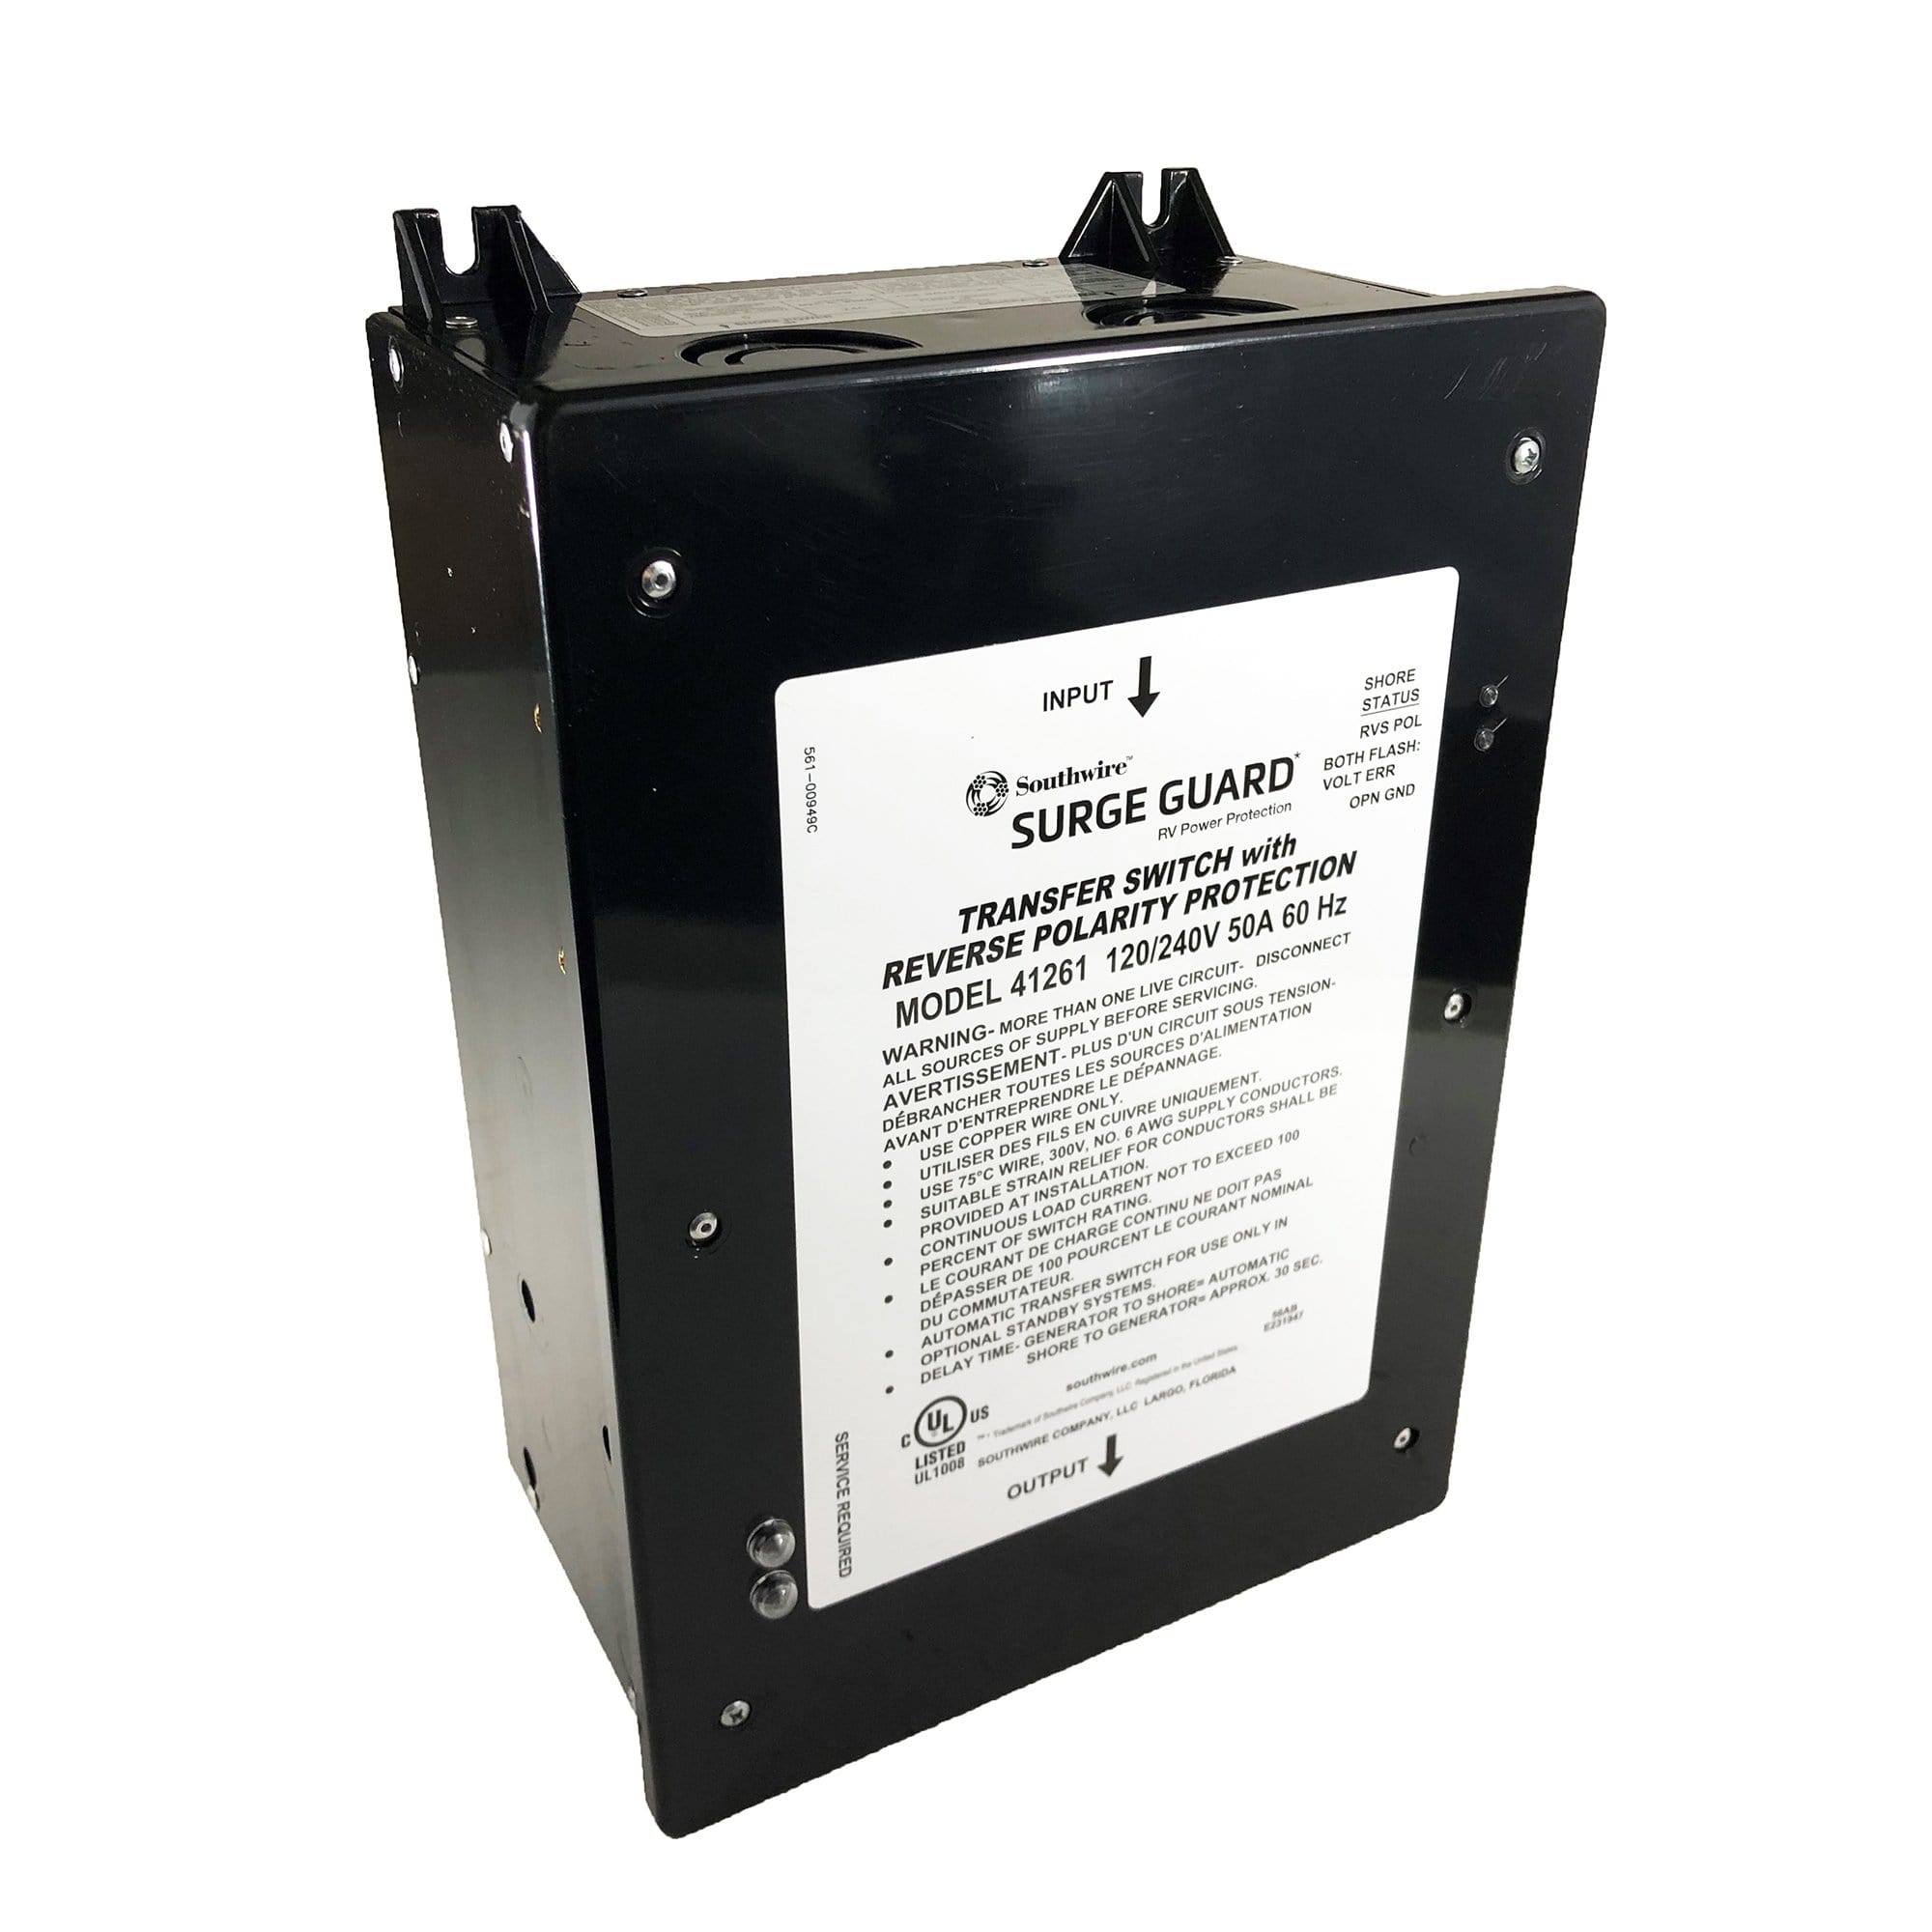 Southwire 41261-011 Entry Level 50A Surge Guard Reverse Polarity Transfer Switch